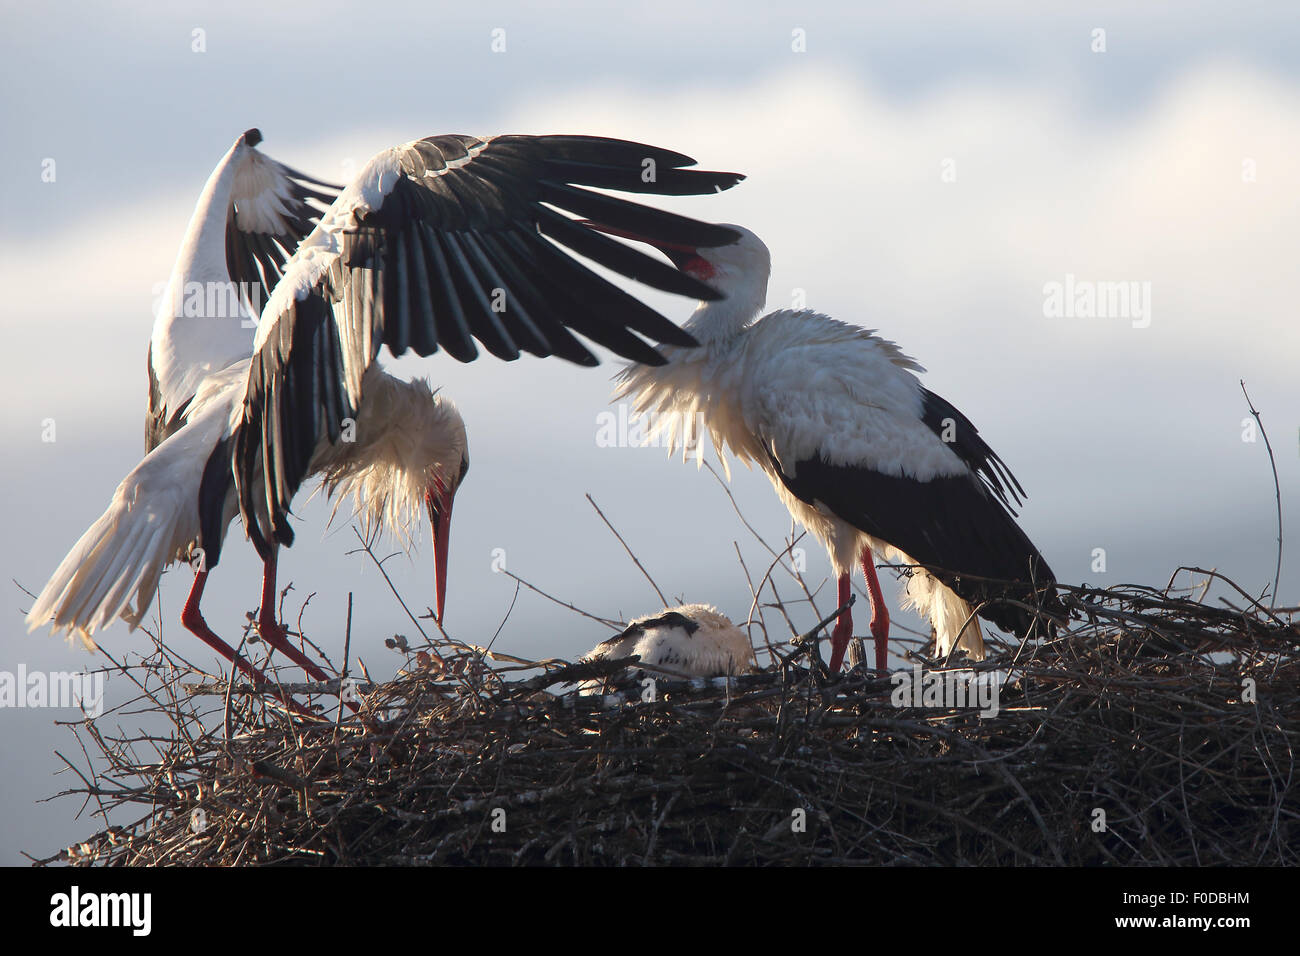 White Storks (Ciconia ciconia), 2 adults, one just returned to the nest, with young in the nest, Trujillo, Extremadura, Spain. Stock Photo